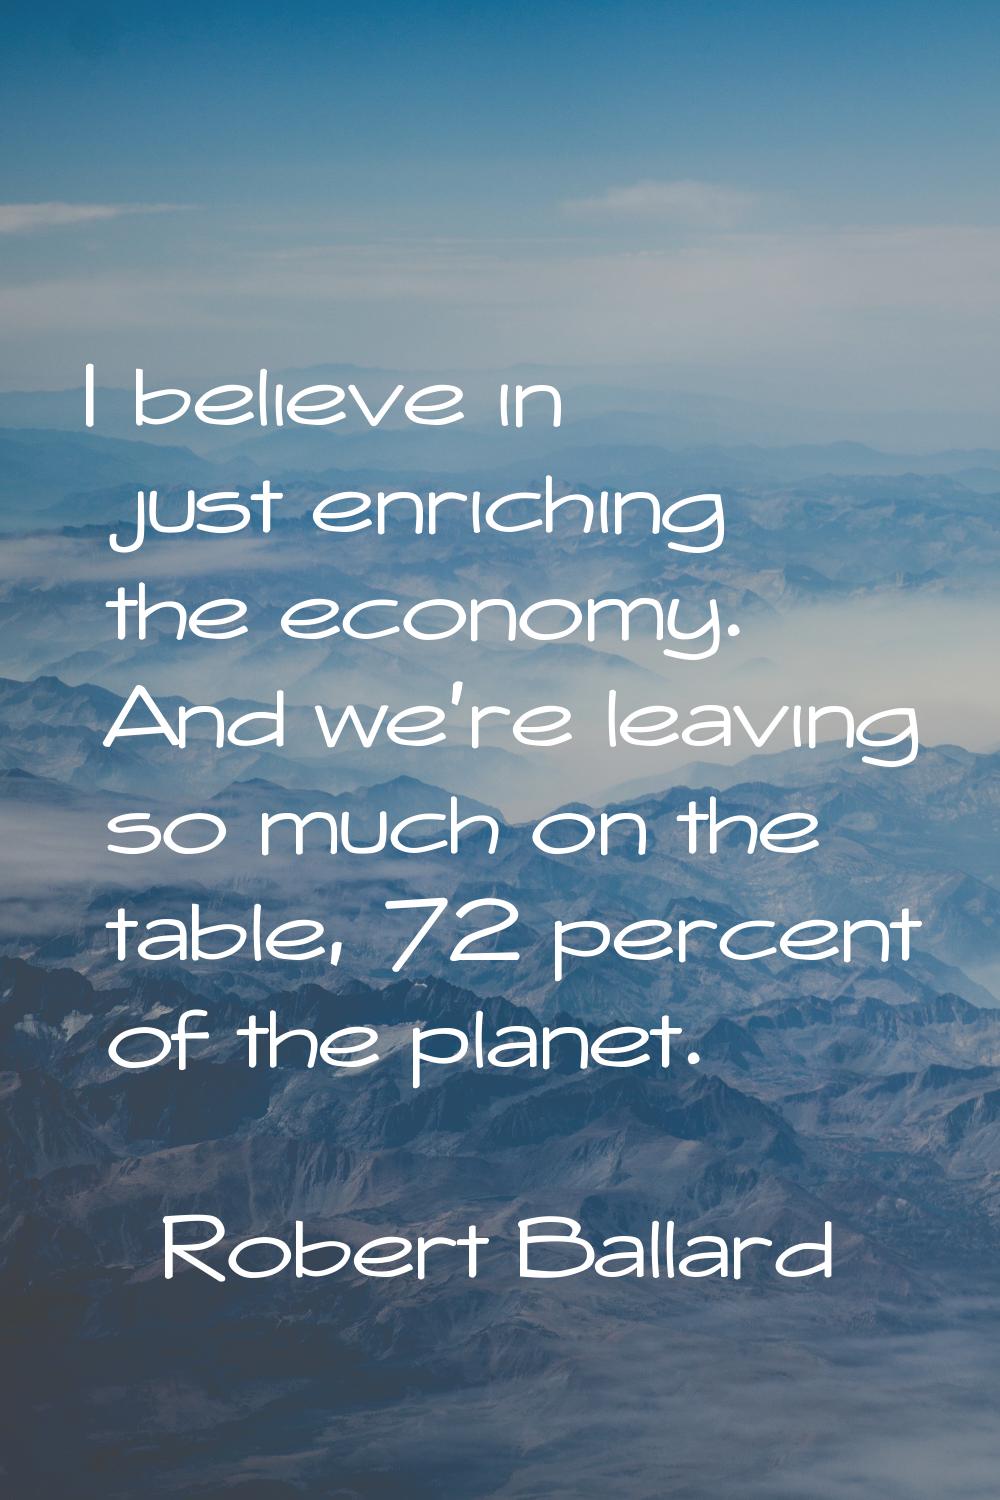 I believe in just enriching the economy. And we're leaving so much on the table, 72 percent of the 